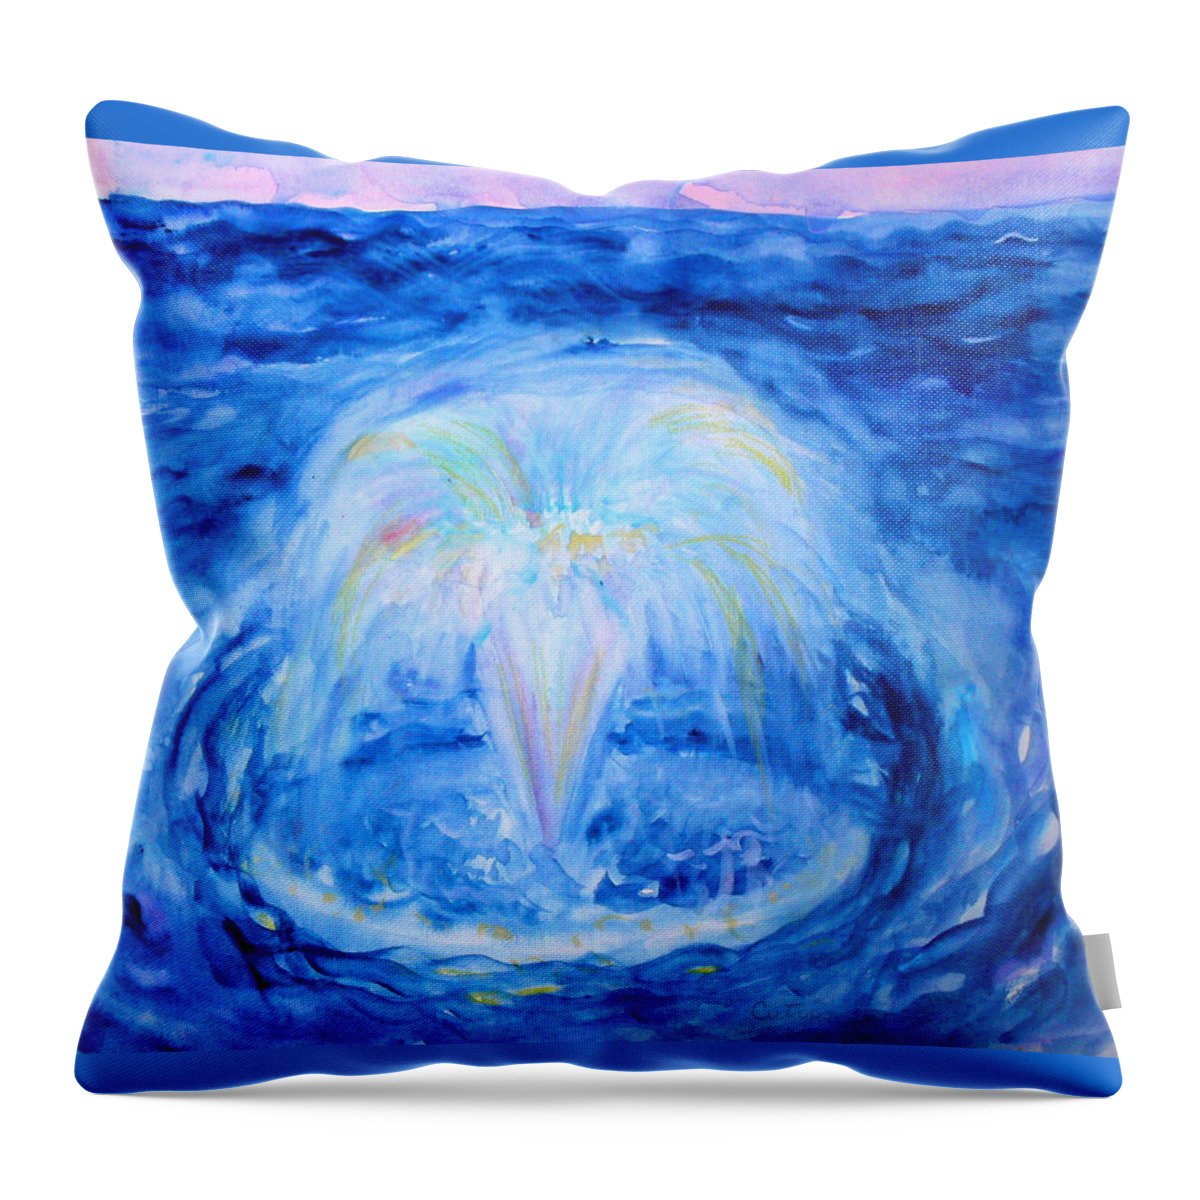 Water Throw Pillow featuring the painting Blue Fountain by Anne Cameron Cutri